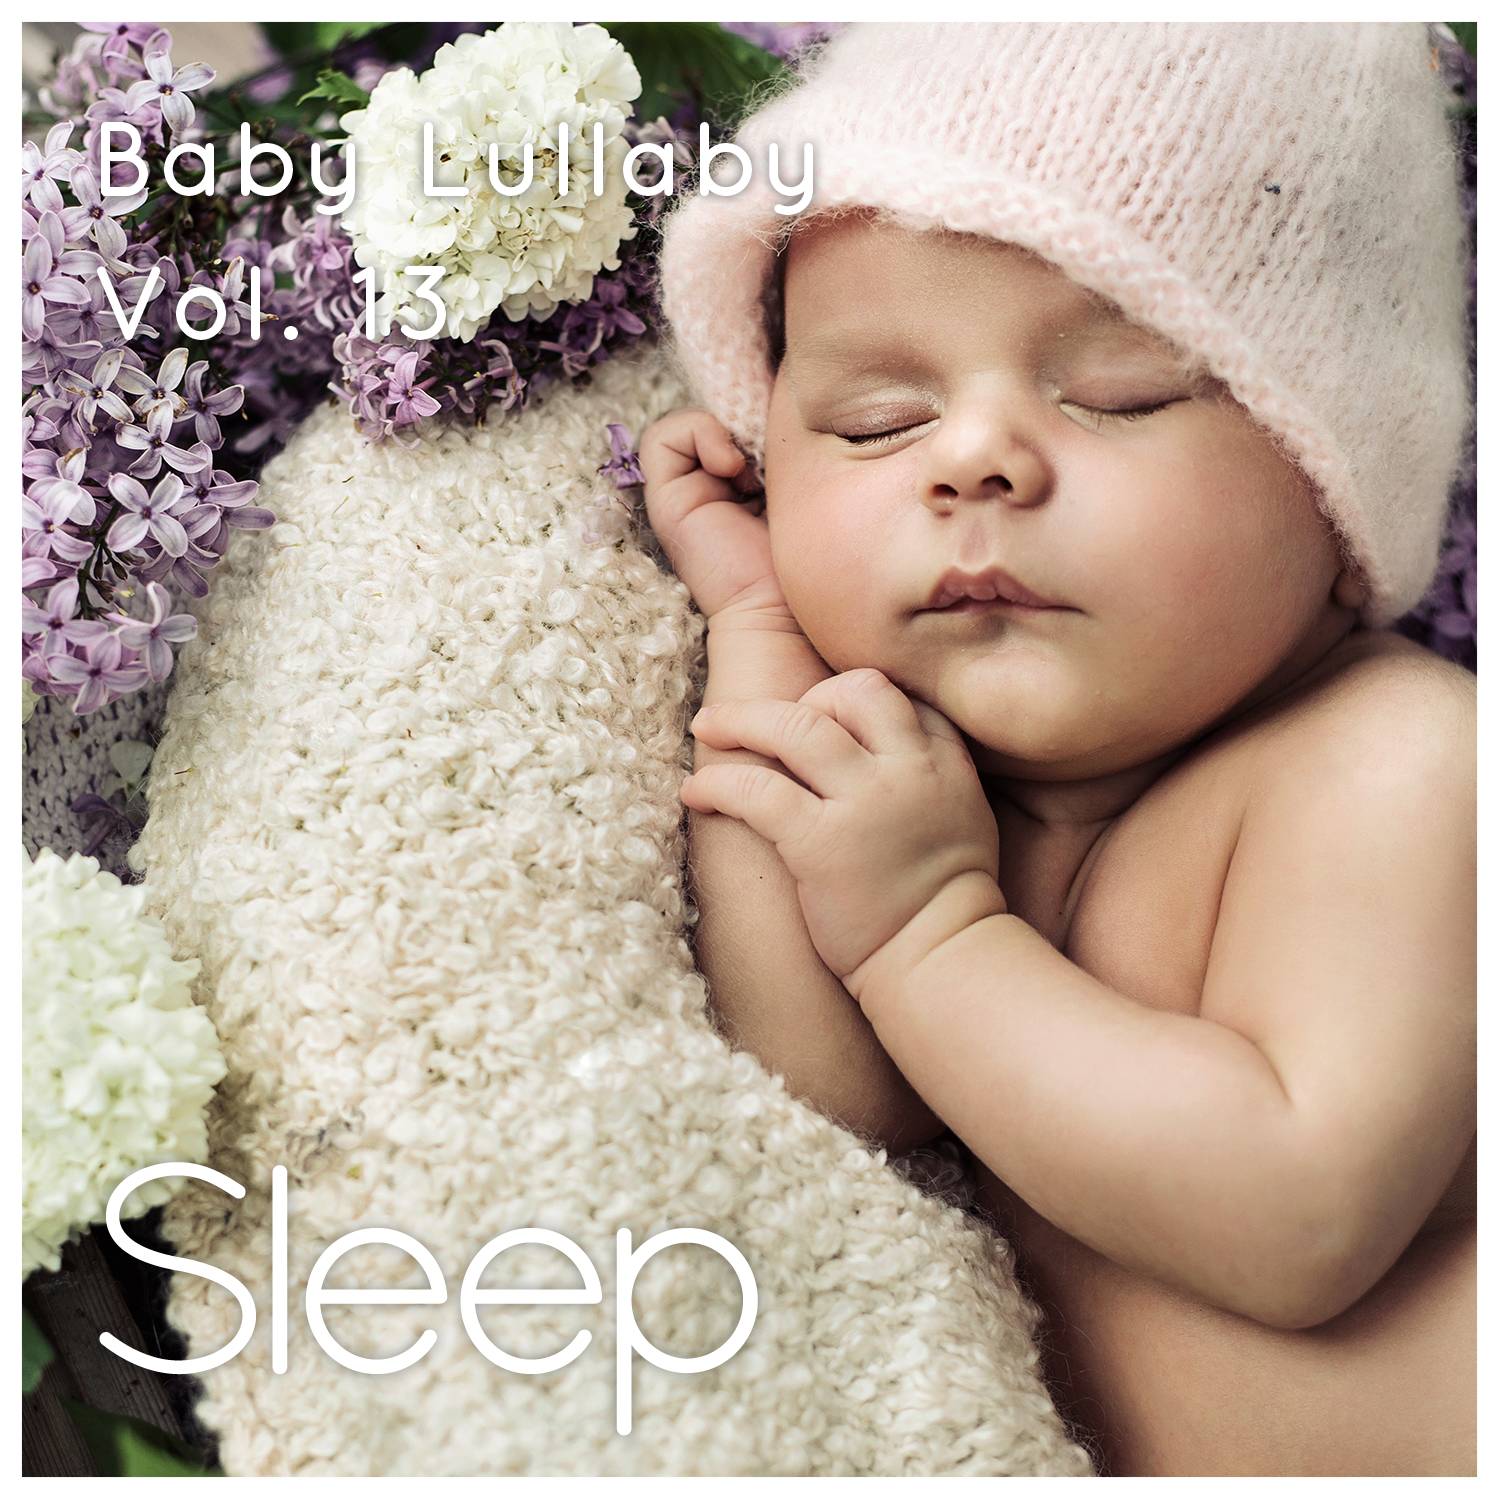 Baby Sleep Ambient Lullaby, Pt. 65